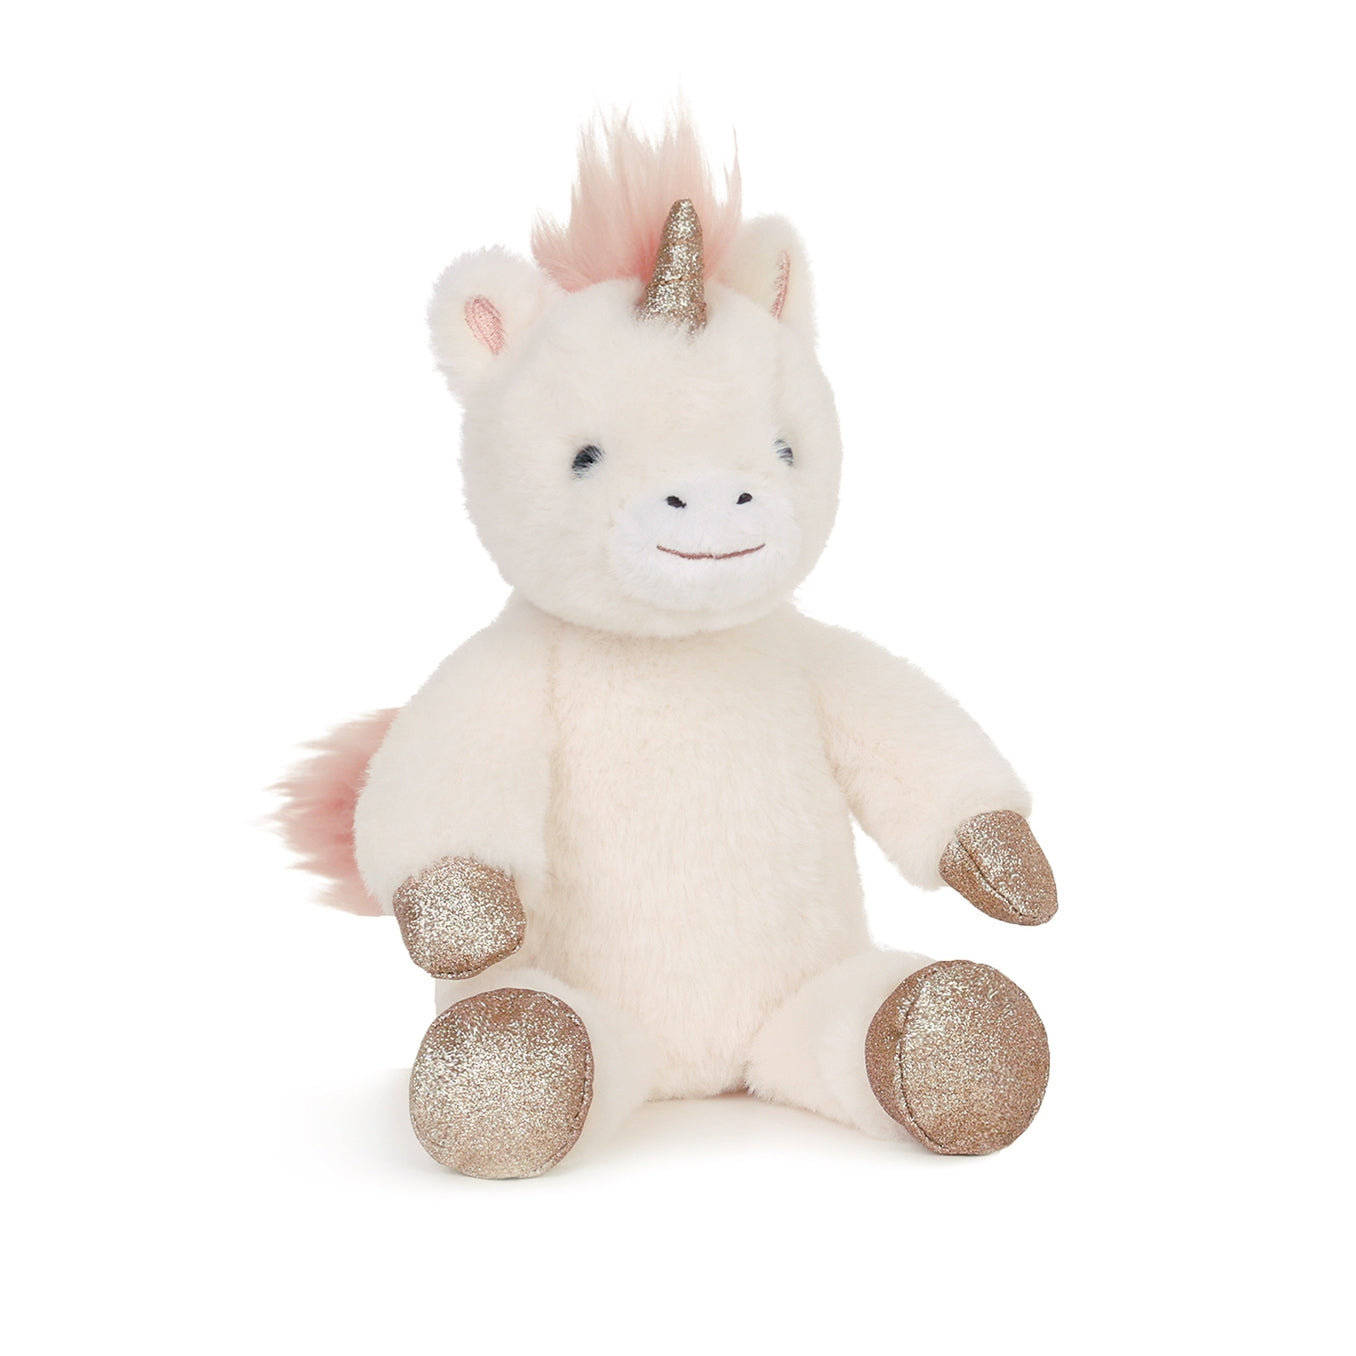 Designed by OB in Australia, these mystical toys are a great snuggly friend for your little ones and their adventures. OB Designs is passionate about design and use a combination of master craftsmen and high-quality materials to create their collection.